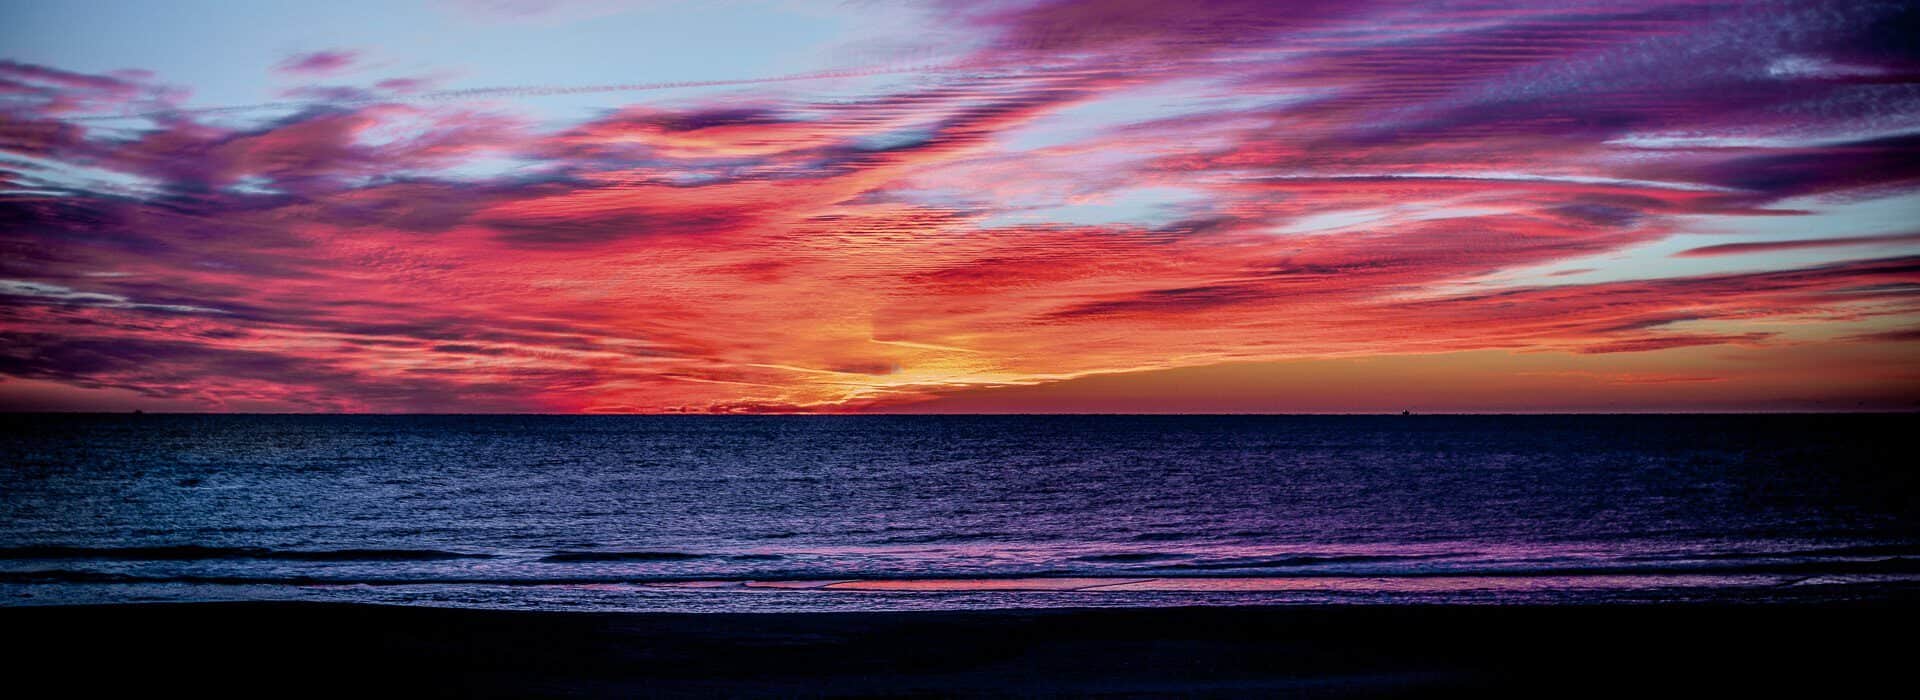 View of a beach with soft rolling waves at dusk with bright orange, pink, blue, and purple clouds in the sky